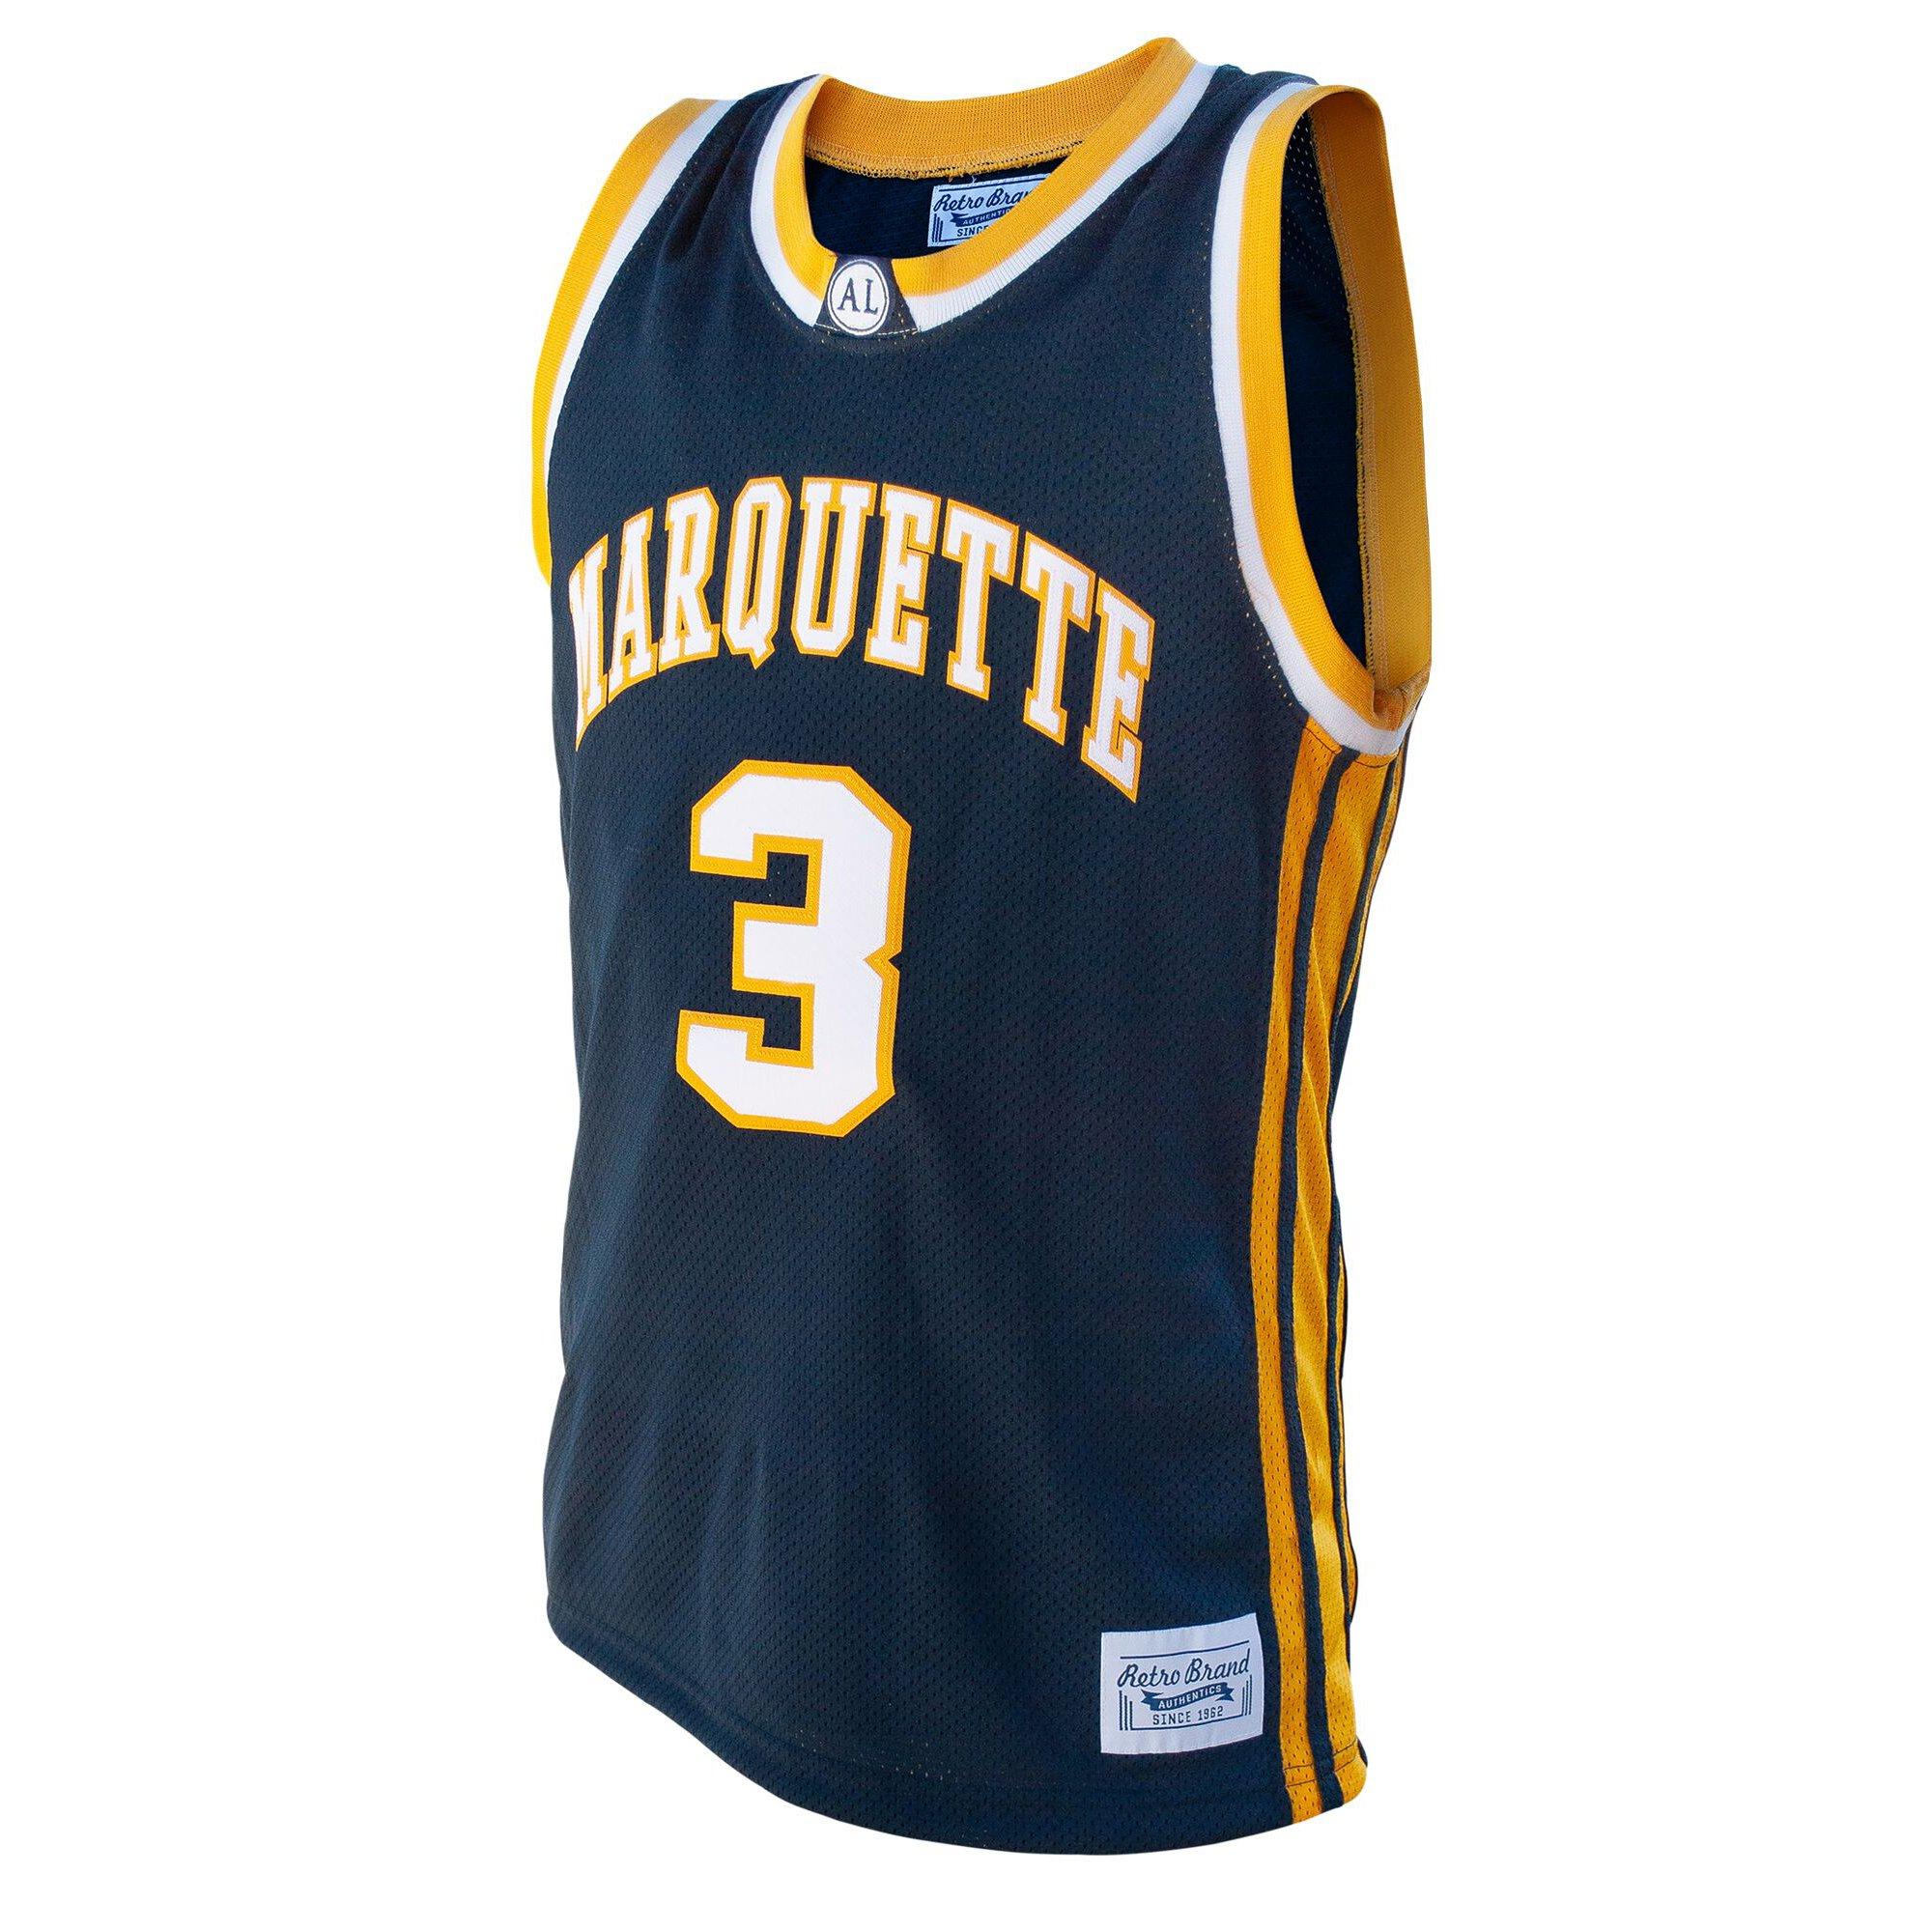 wade marquette jersey